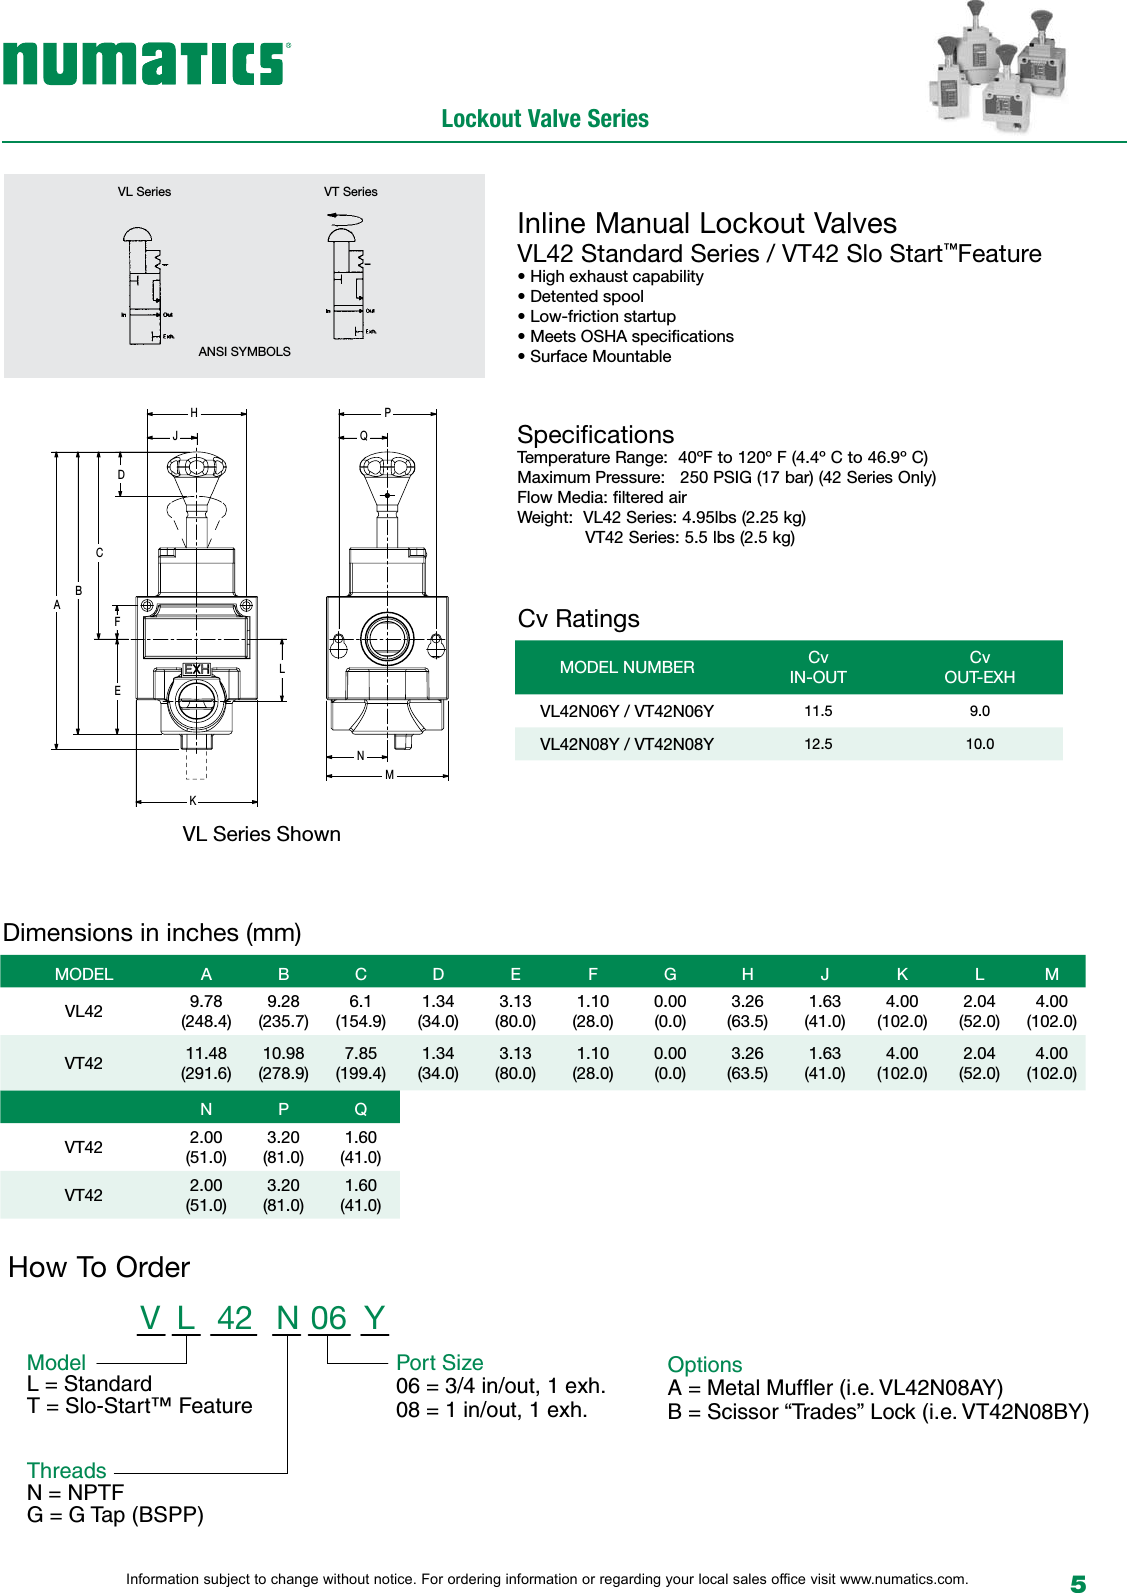 Page 7 of 12 - Flow Numatic Lockout Series-1505484633 User Manual